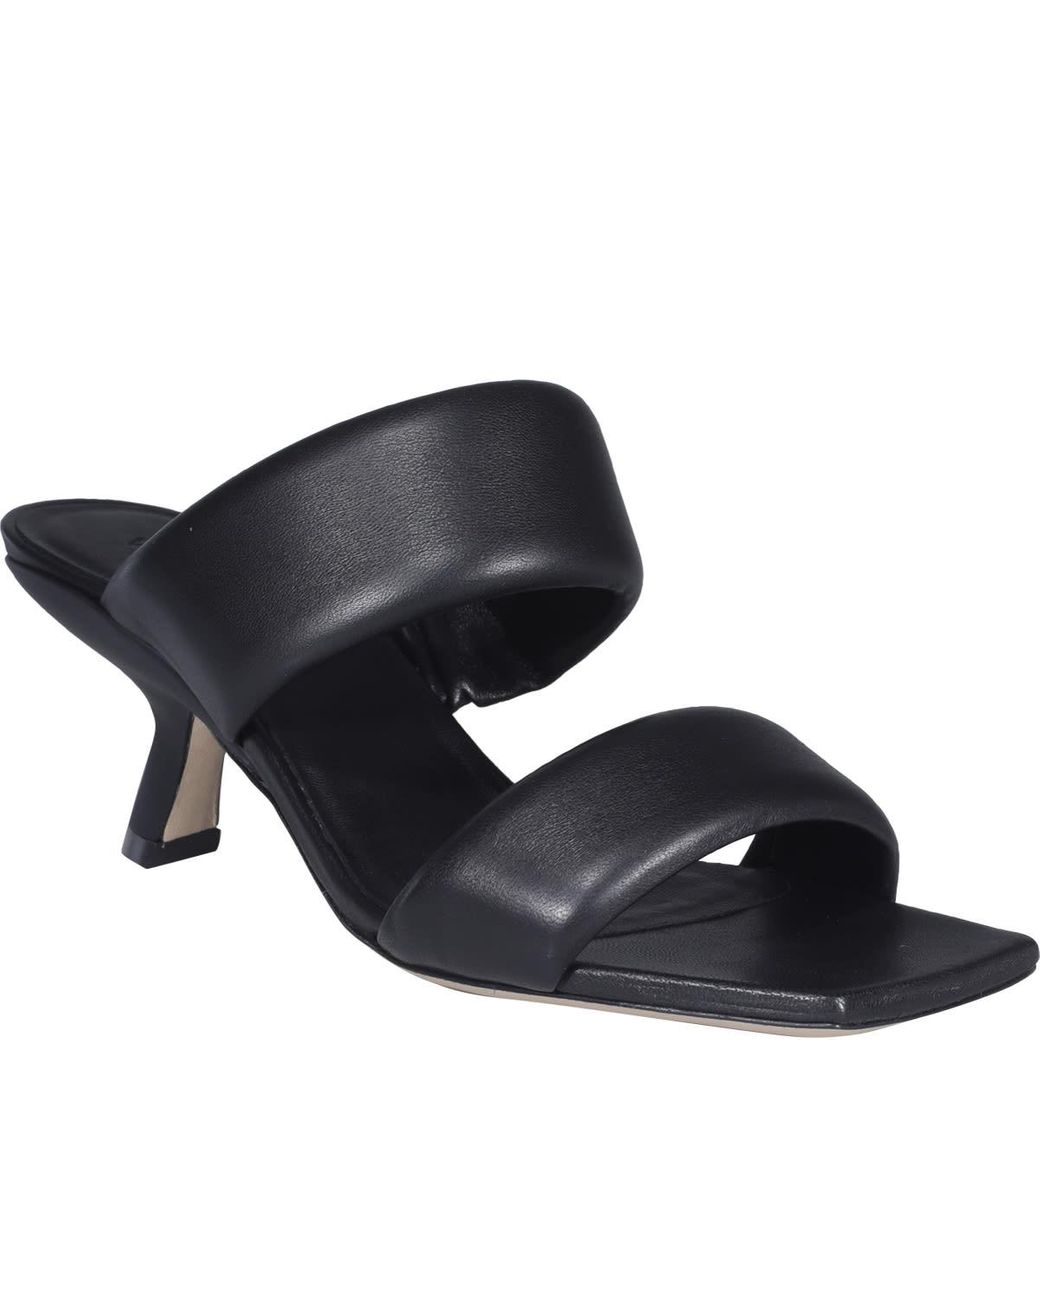 Vic Matié Leather Betty Sandals in Black - Lyst